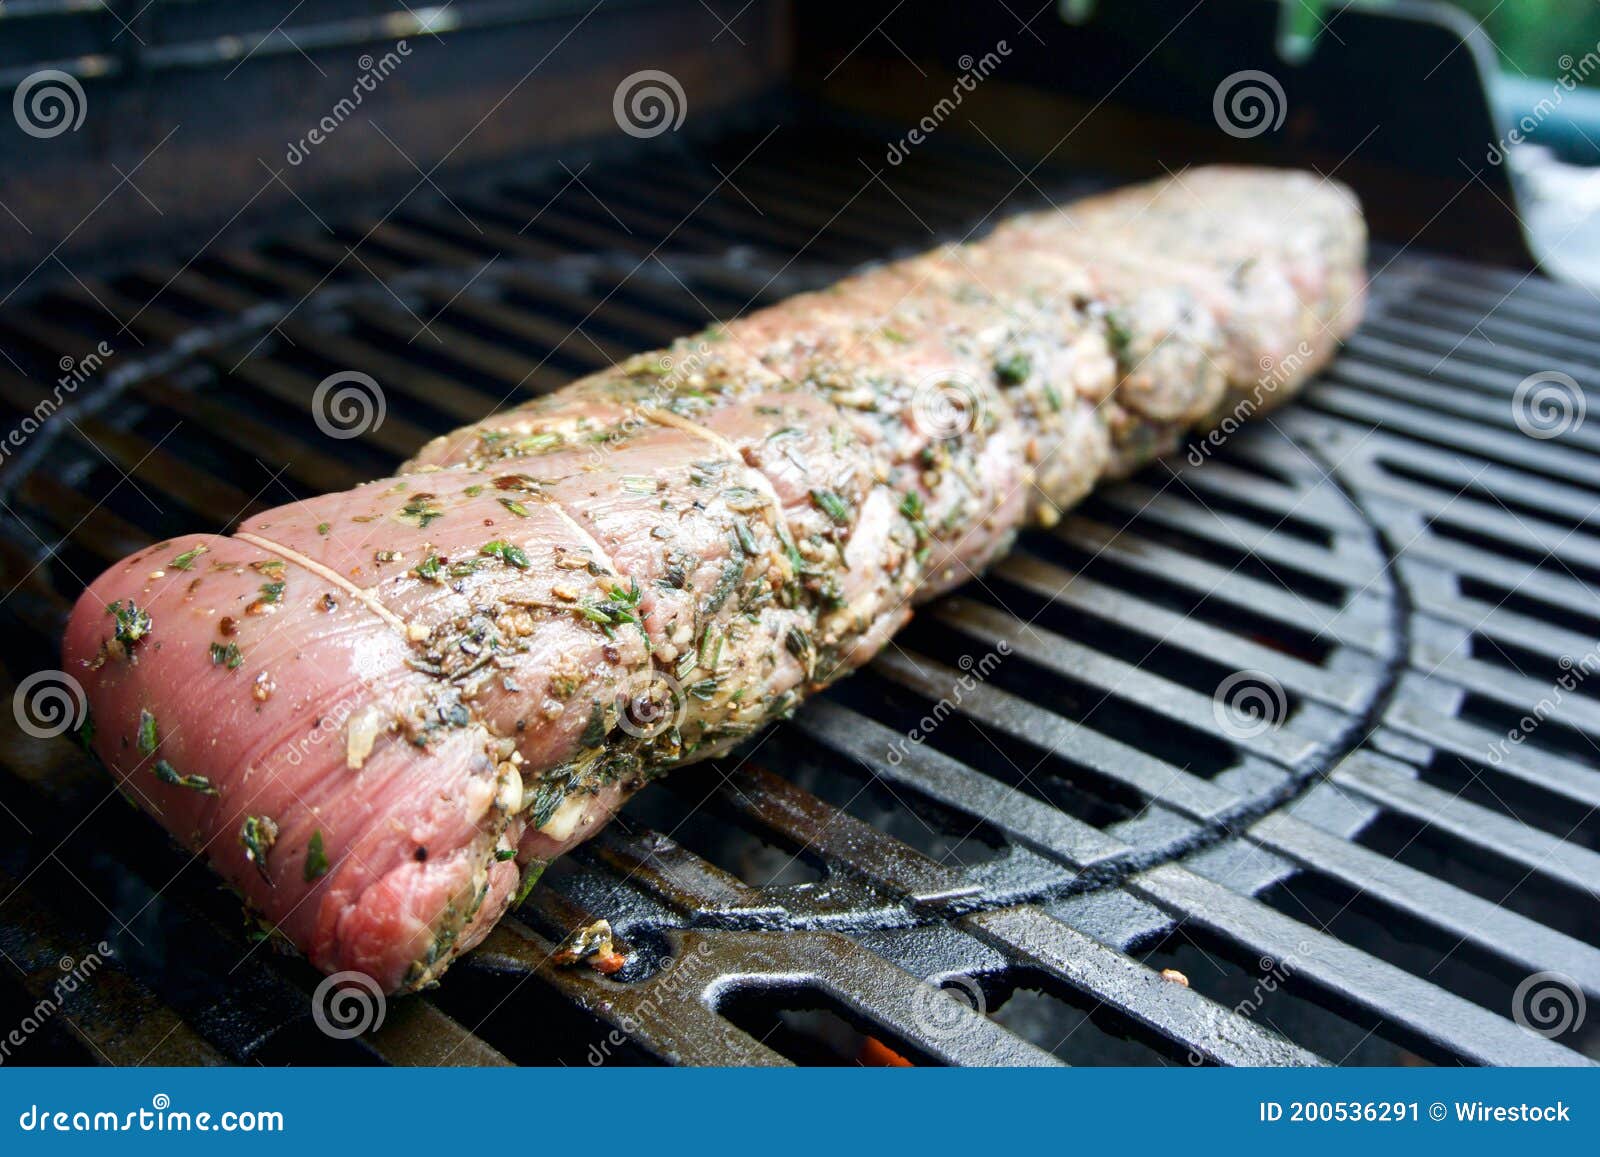 closeup shot of an argentinan beef filet on the grill